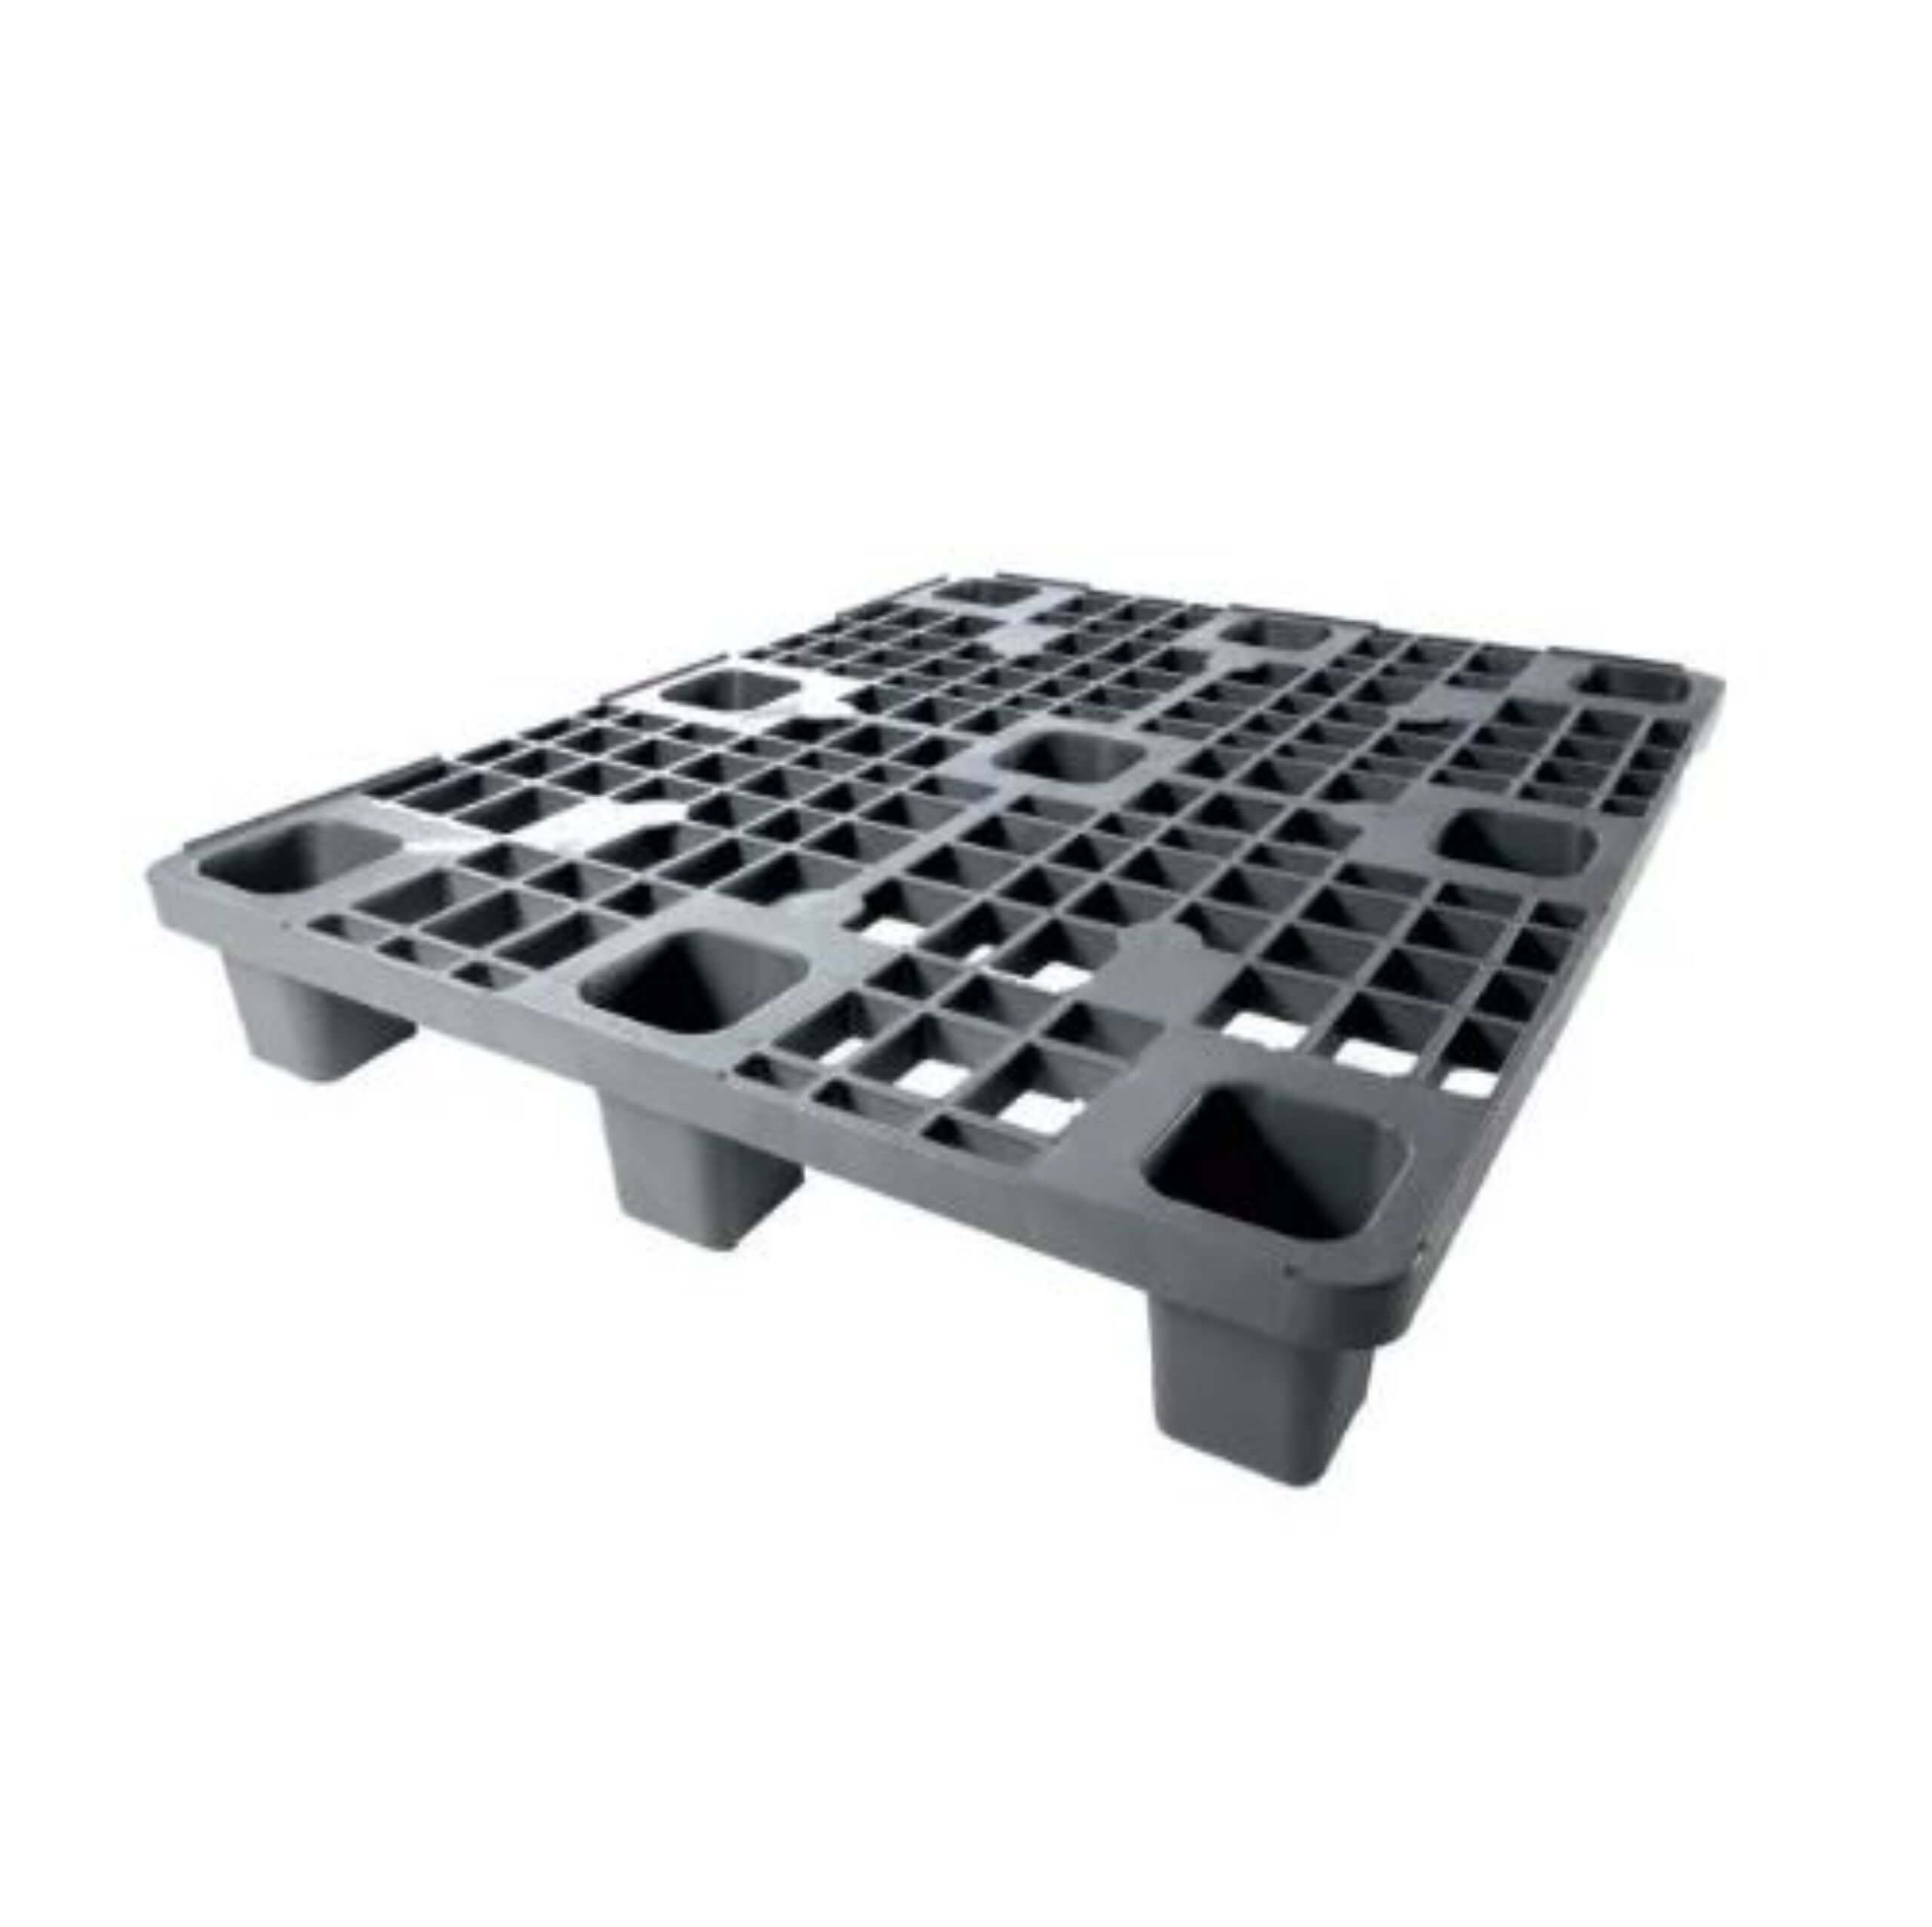 An image of our Plastic Shipping Pallets.